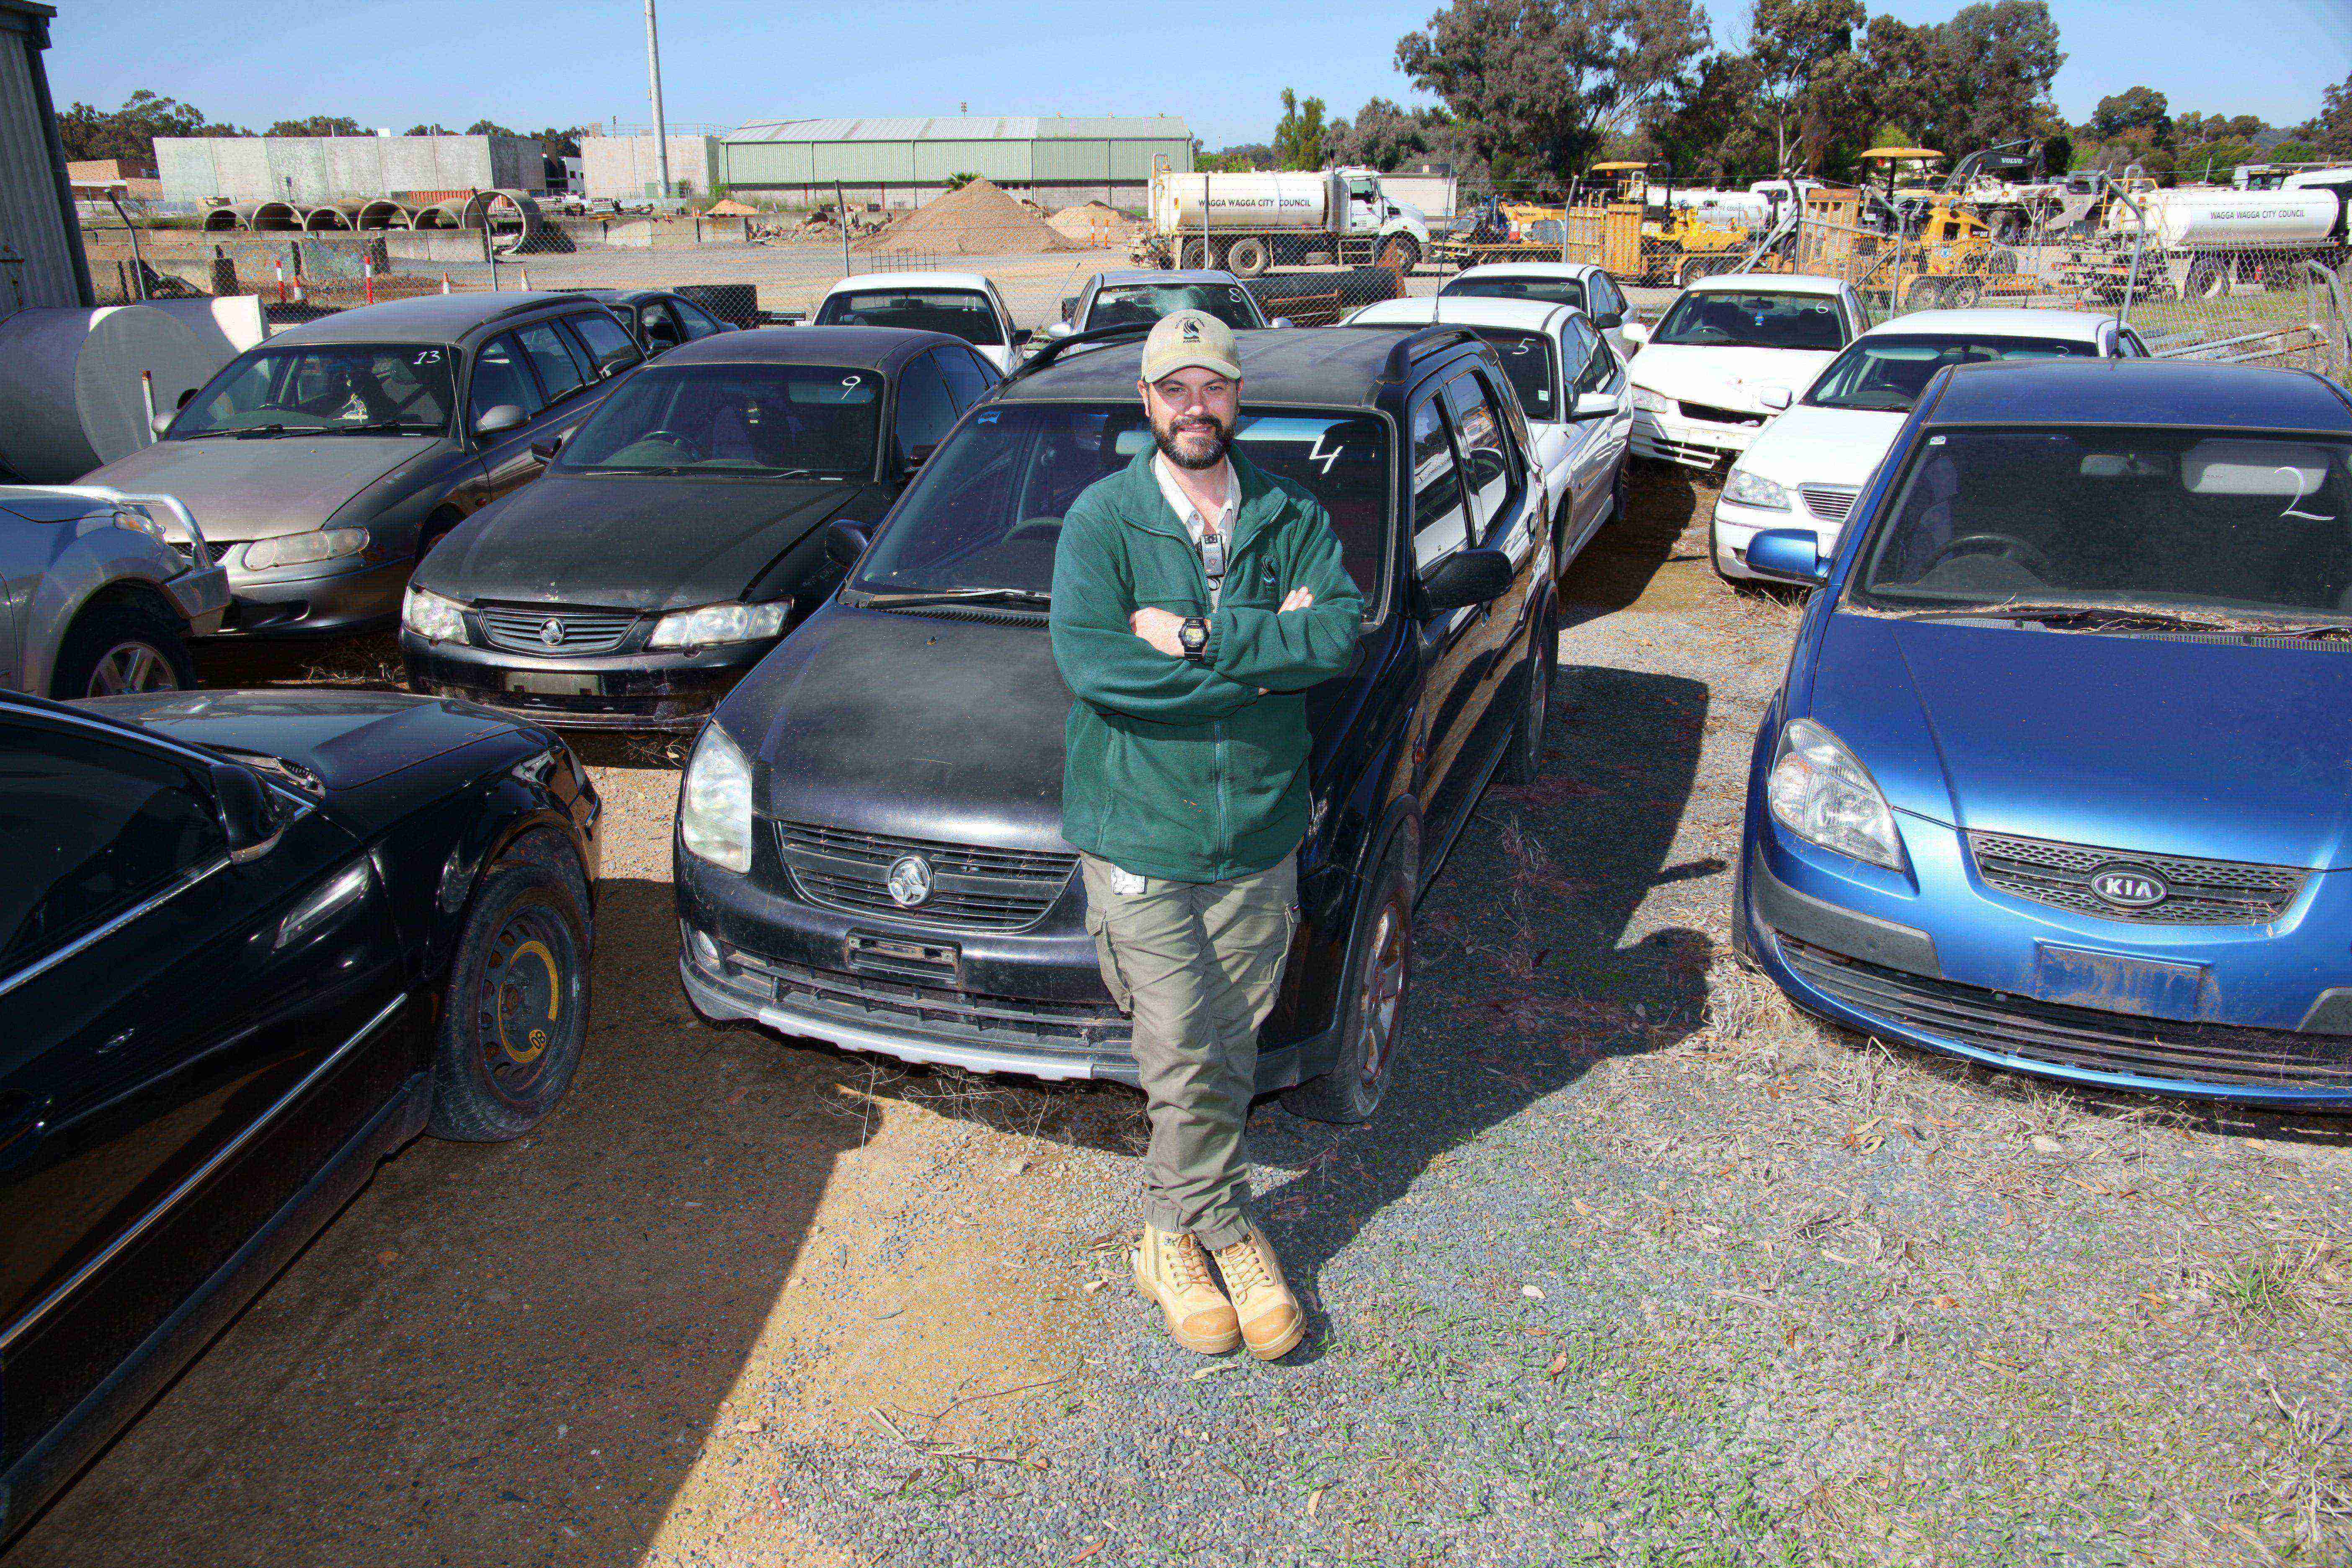 Wagga Wagga's abandoned cars will be sold to the highest bidders